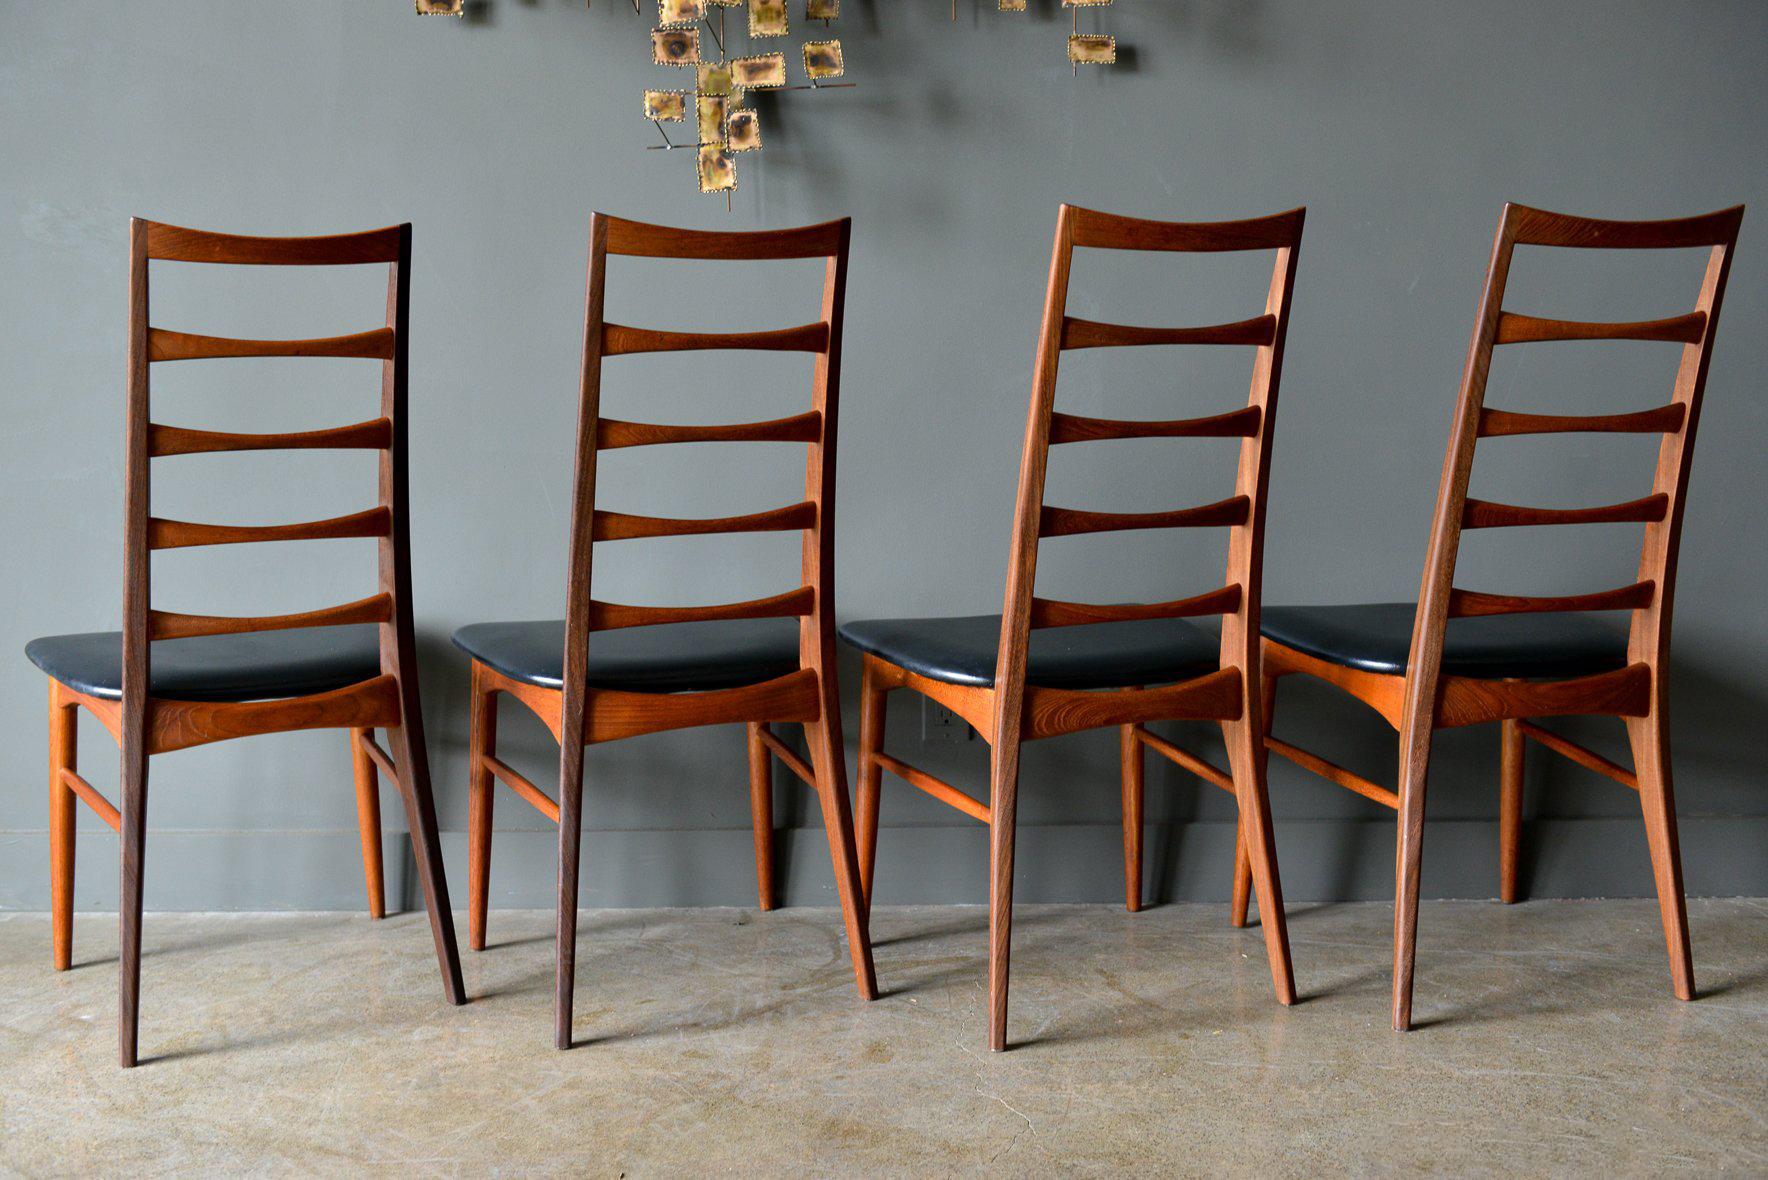 Ladderback Dining Chairs by Niels Kofoed, ca. 1960.  Beautiful original condition with original leatherette seats and sculpted teak ladder backrests.  Teak is dark and has the appearance of walnut so you could pair with any walnut table.  Very good